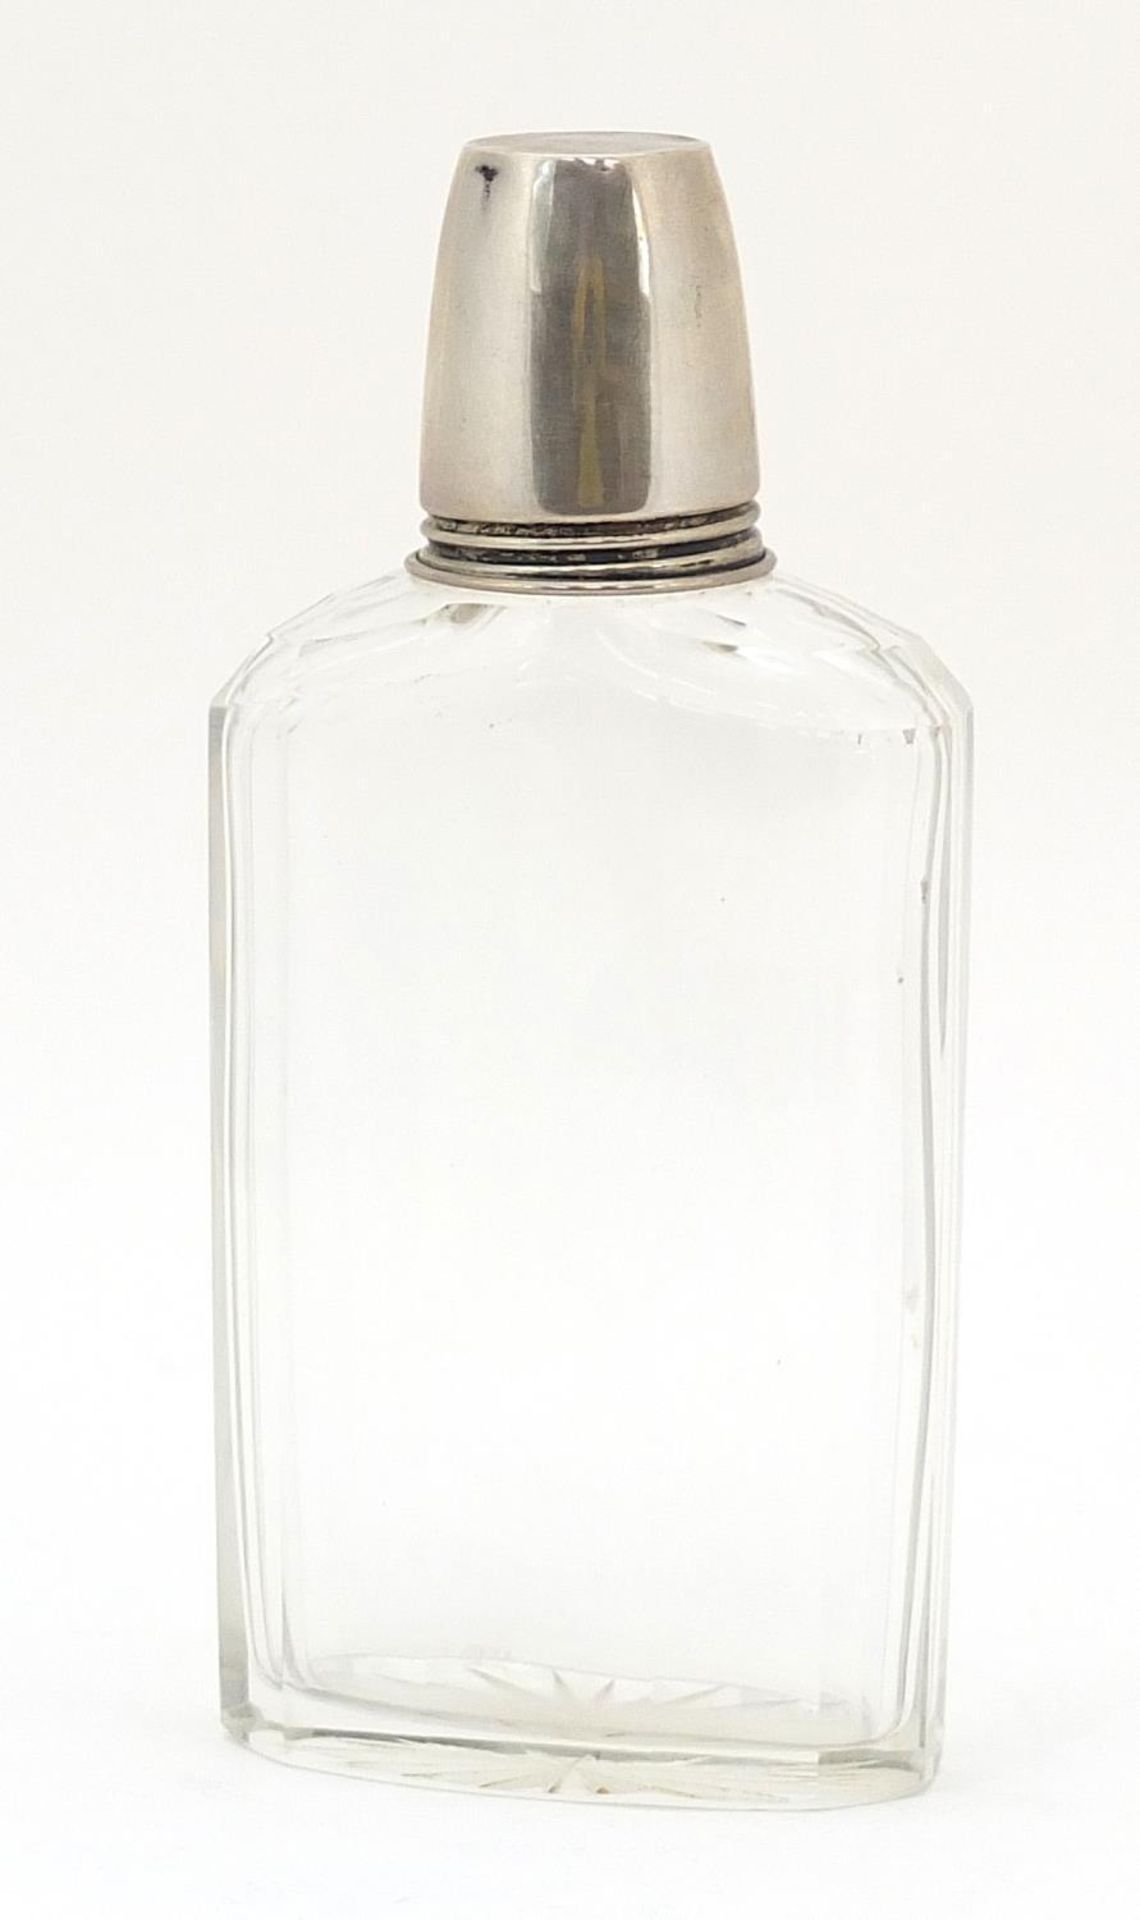 German silver and cut glass flask, 16cm high